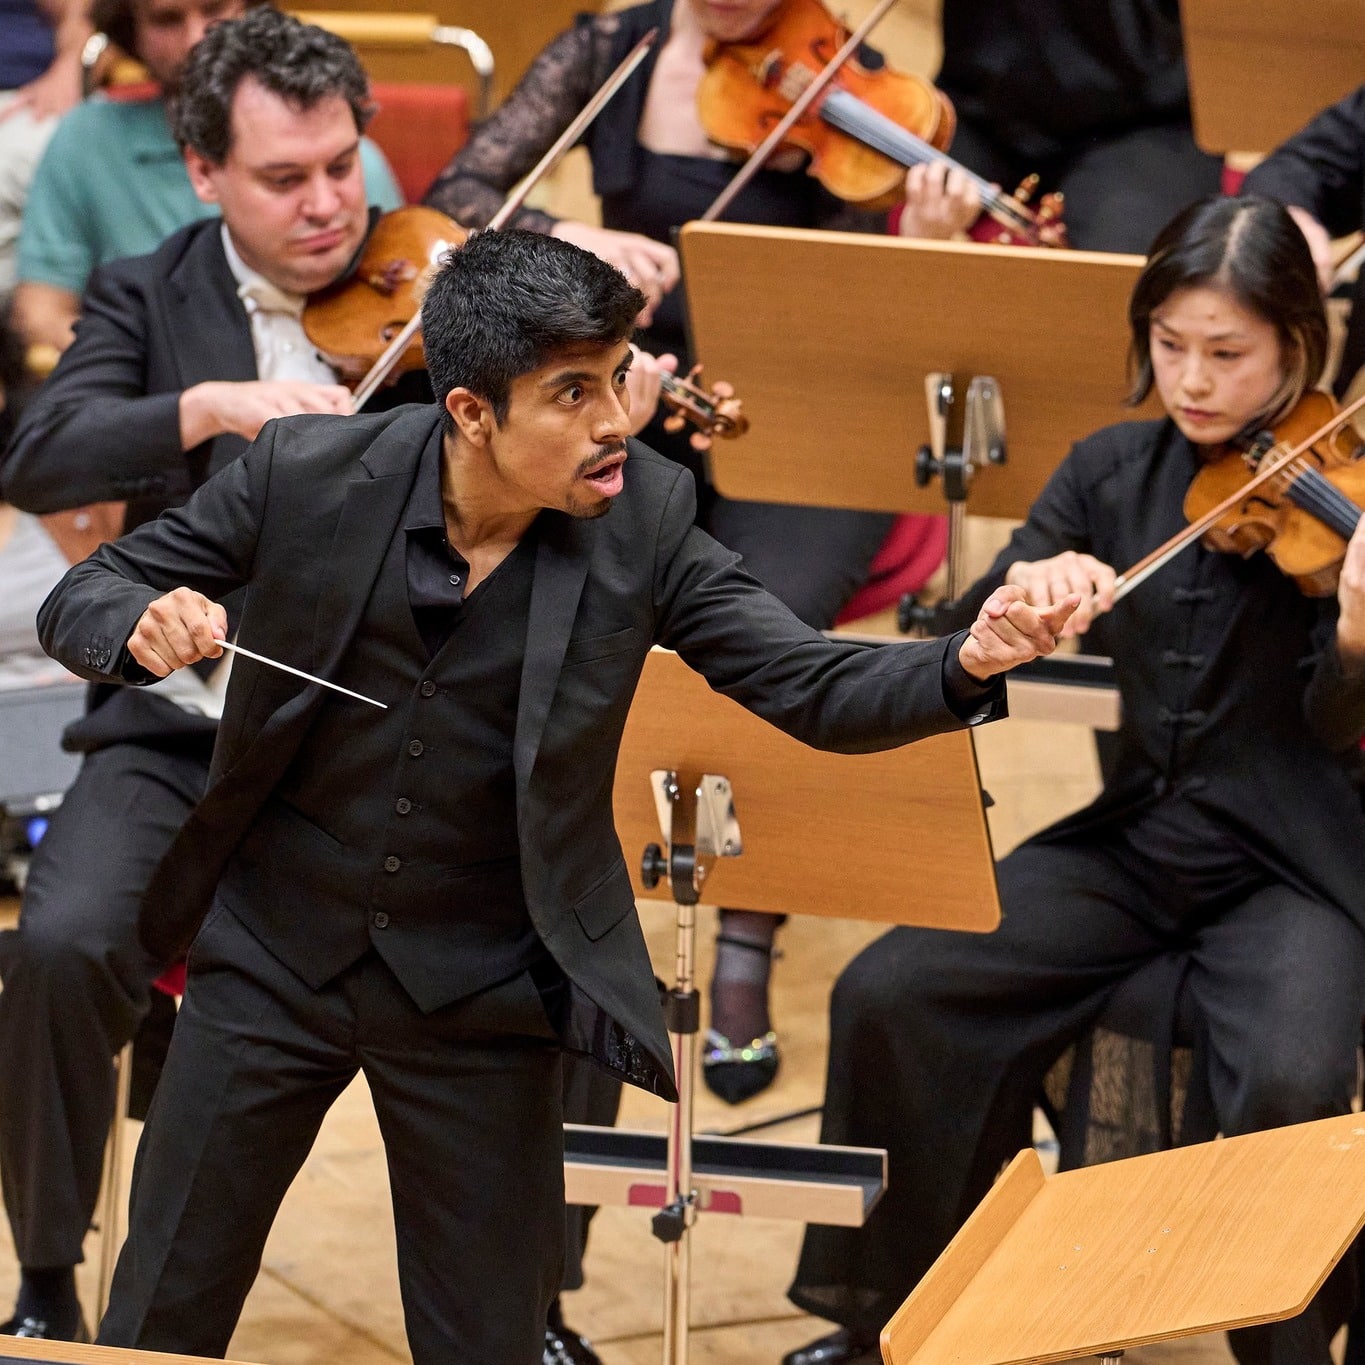 A Peruvian wins German Conducting Competition